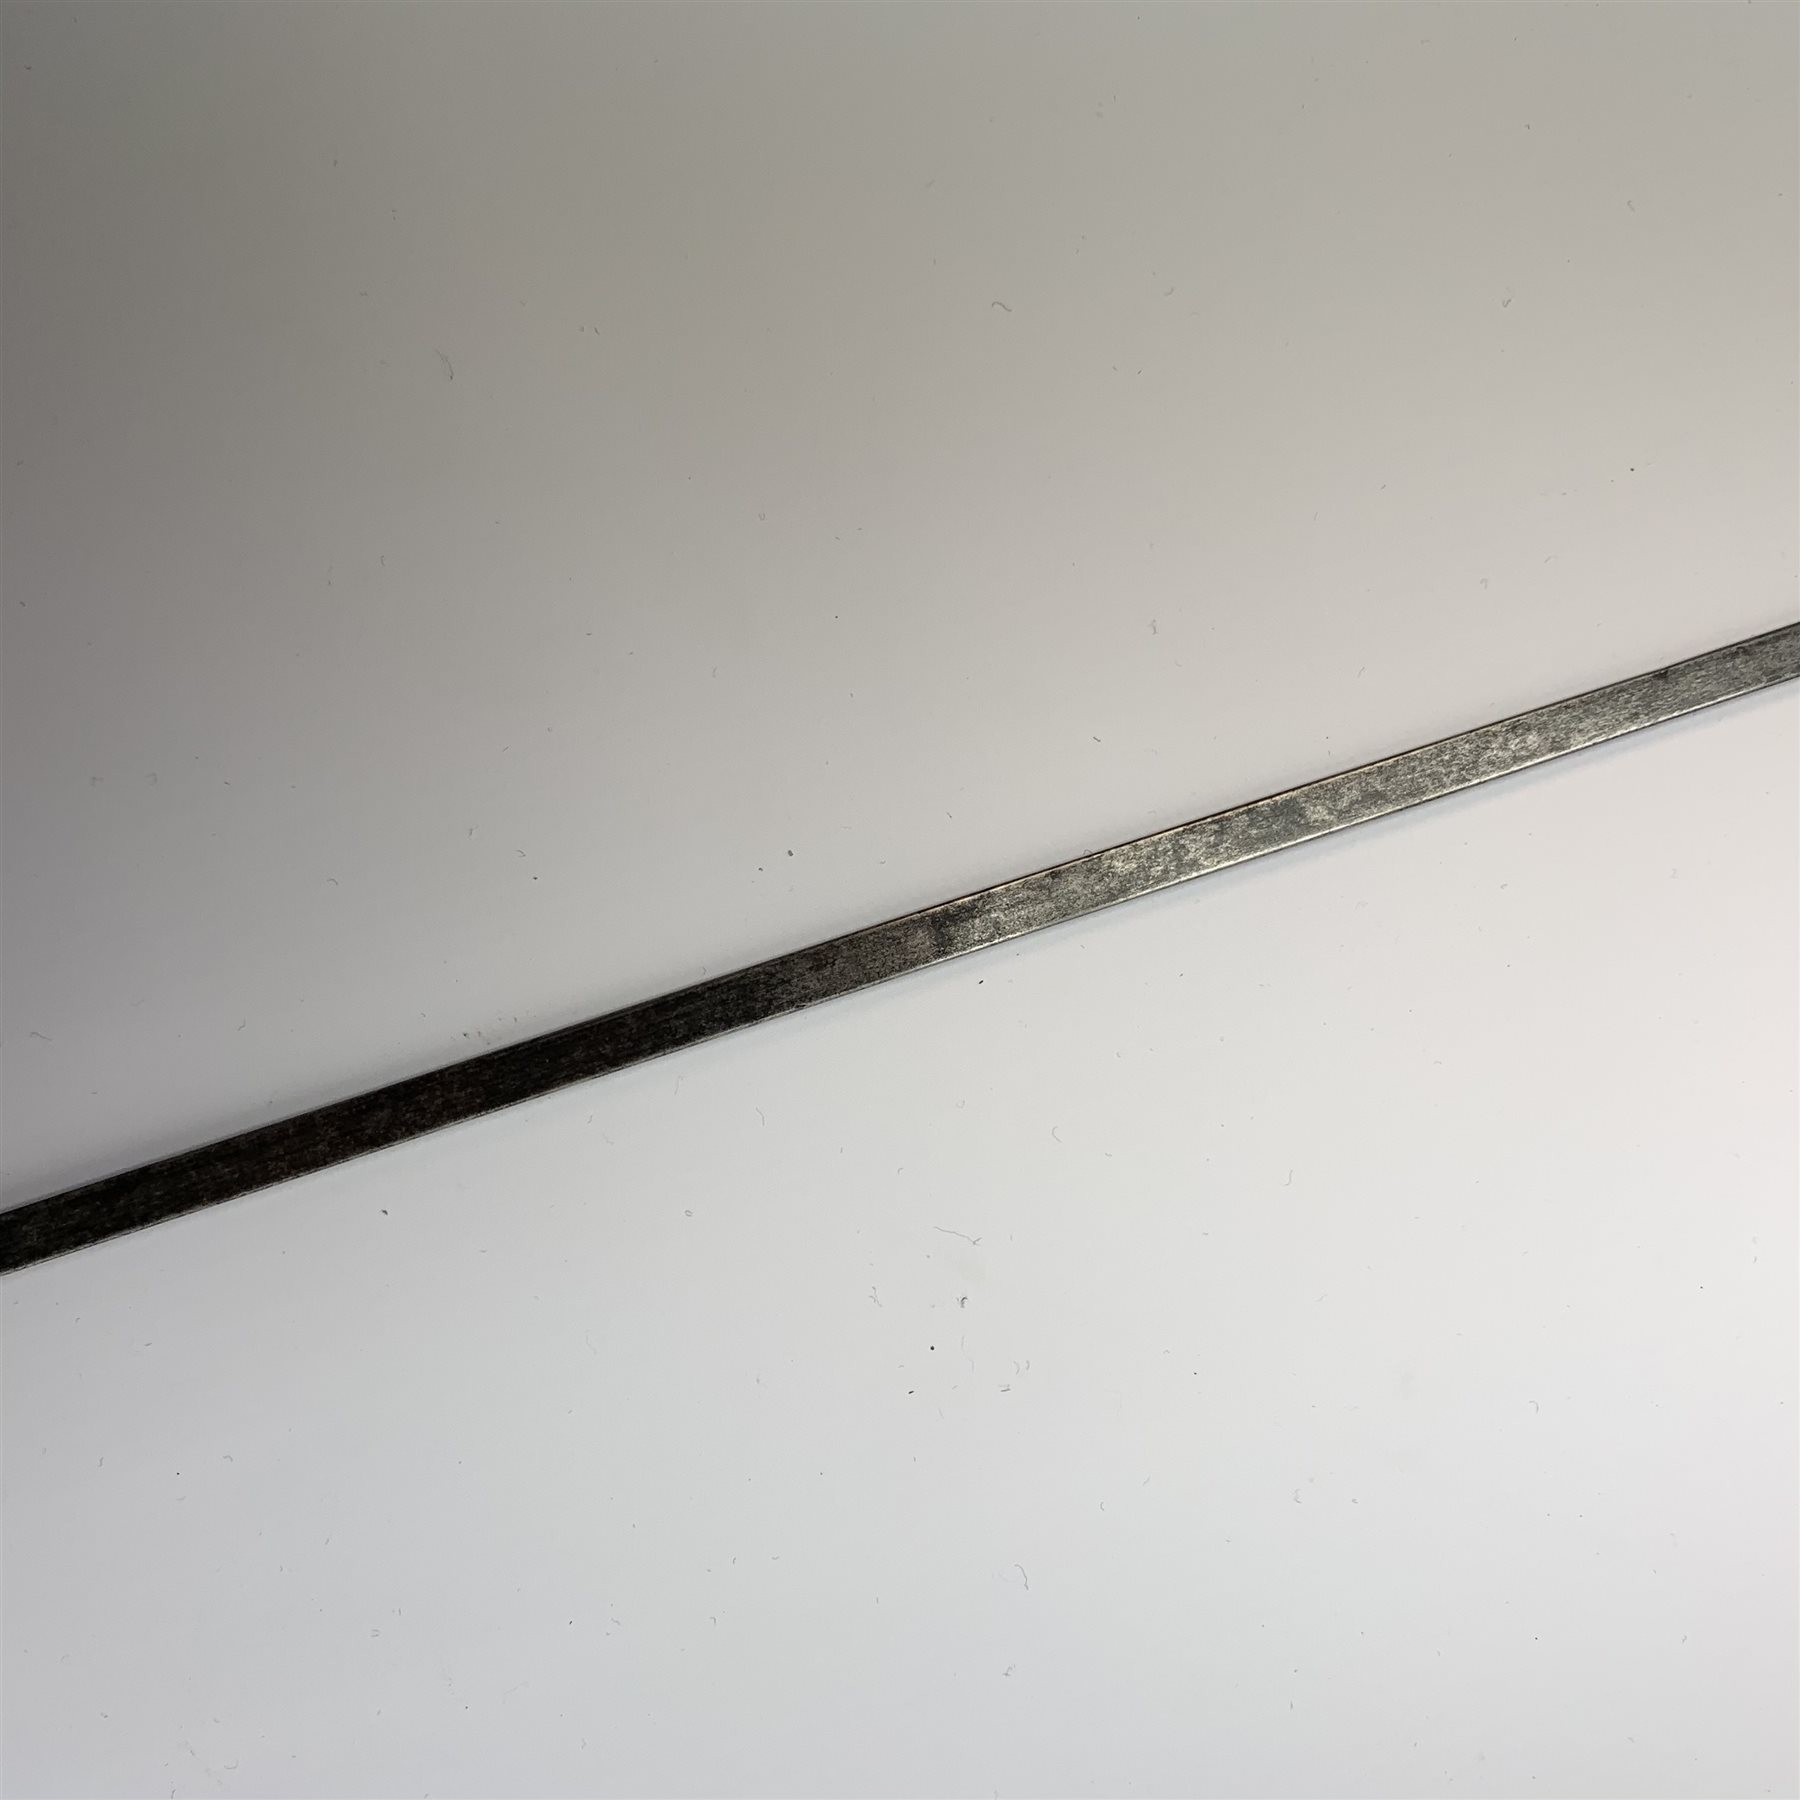 19th century malacca sword-stick with ivory handle and engraved white metal mounts, slim 74cm engrav - Image 10 of 10